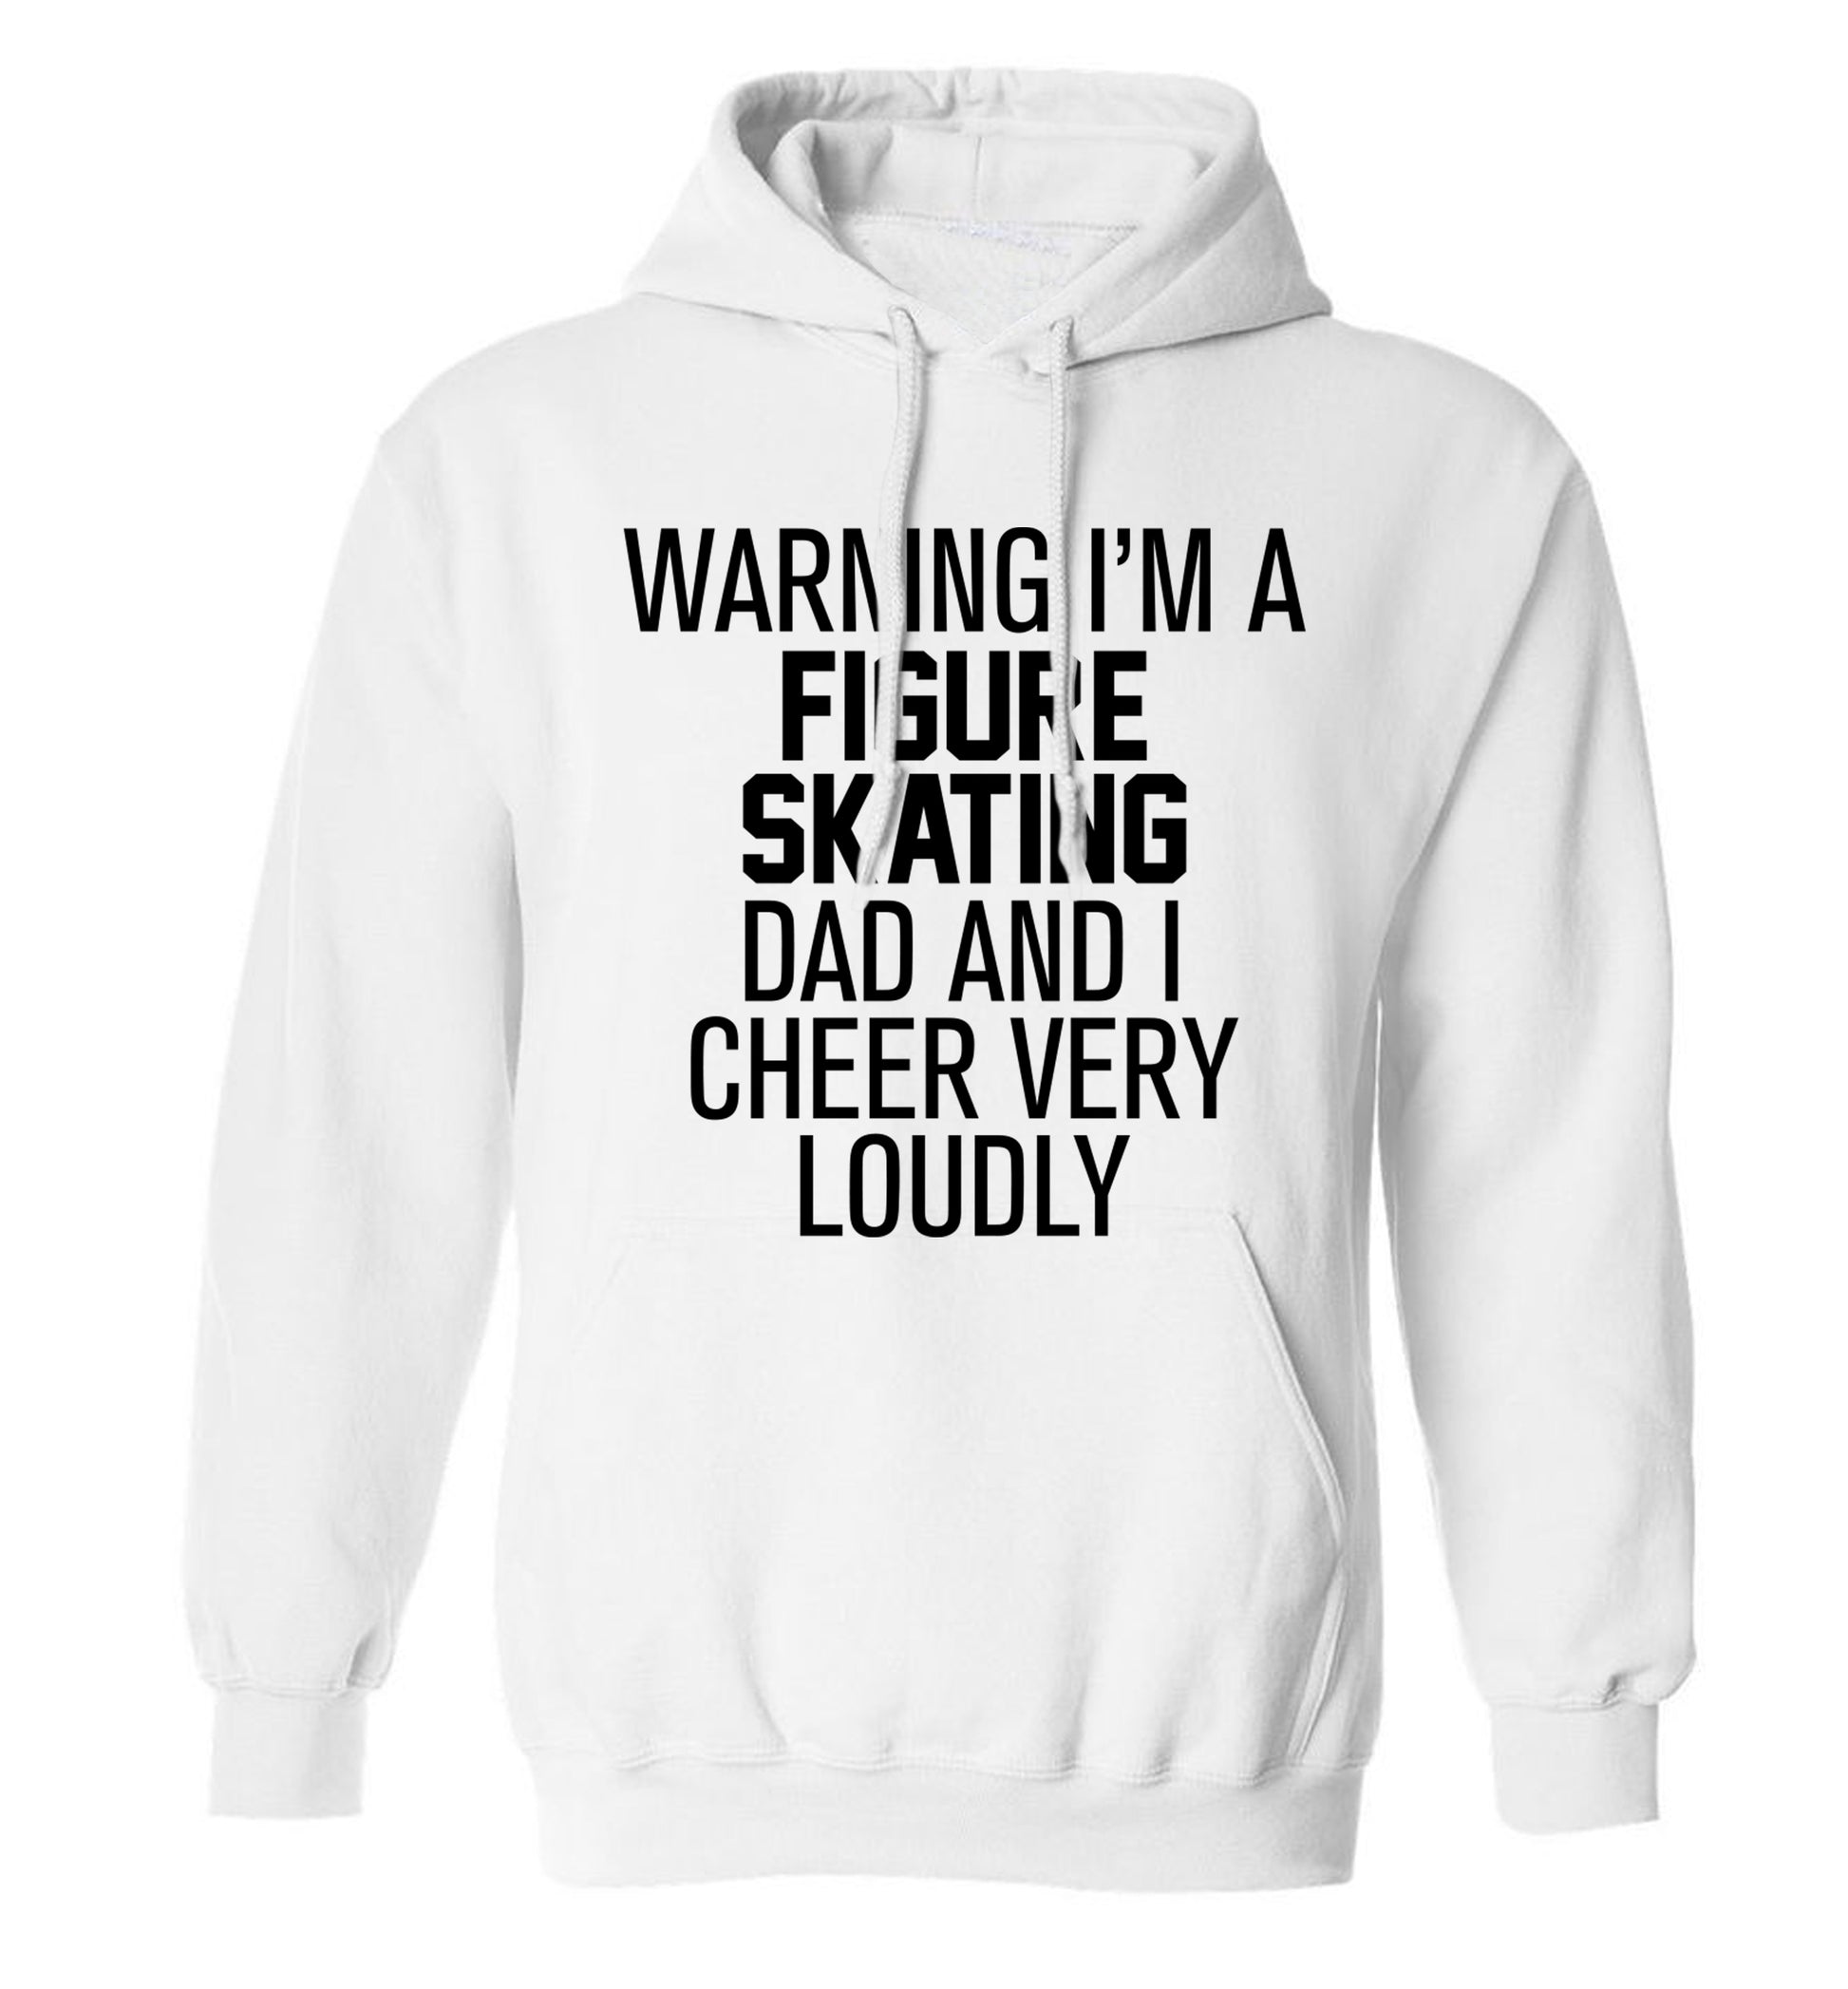 Warning I'm a figure skating dad and I cheer very loudly adults unisexwhite hoodie 2XL